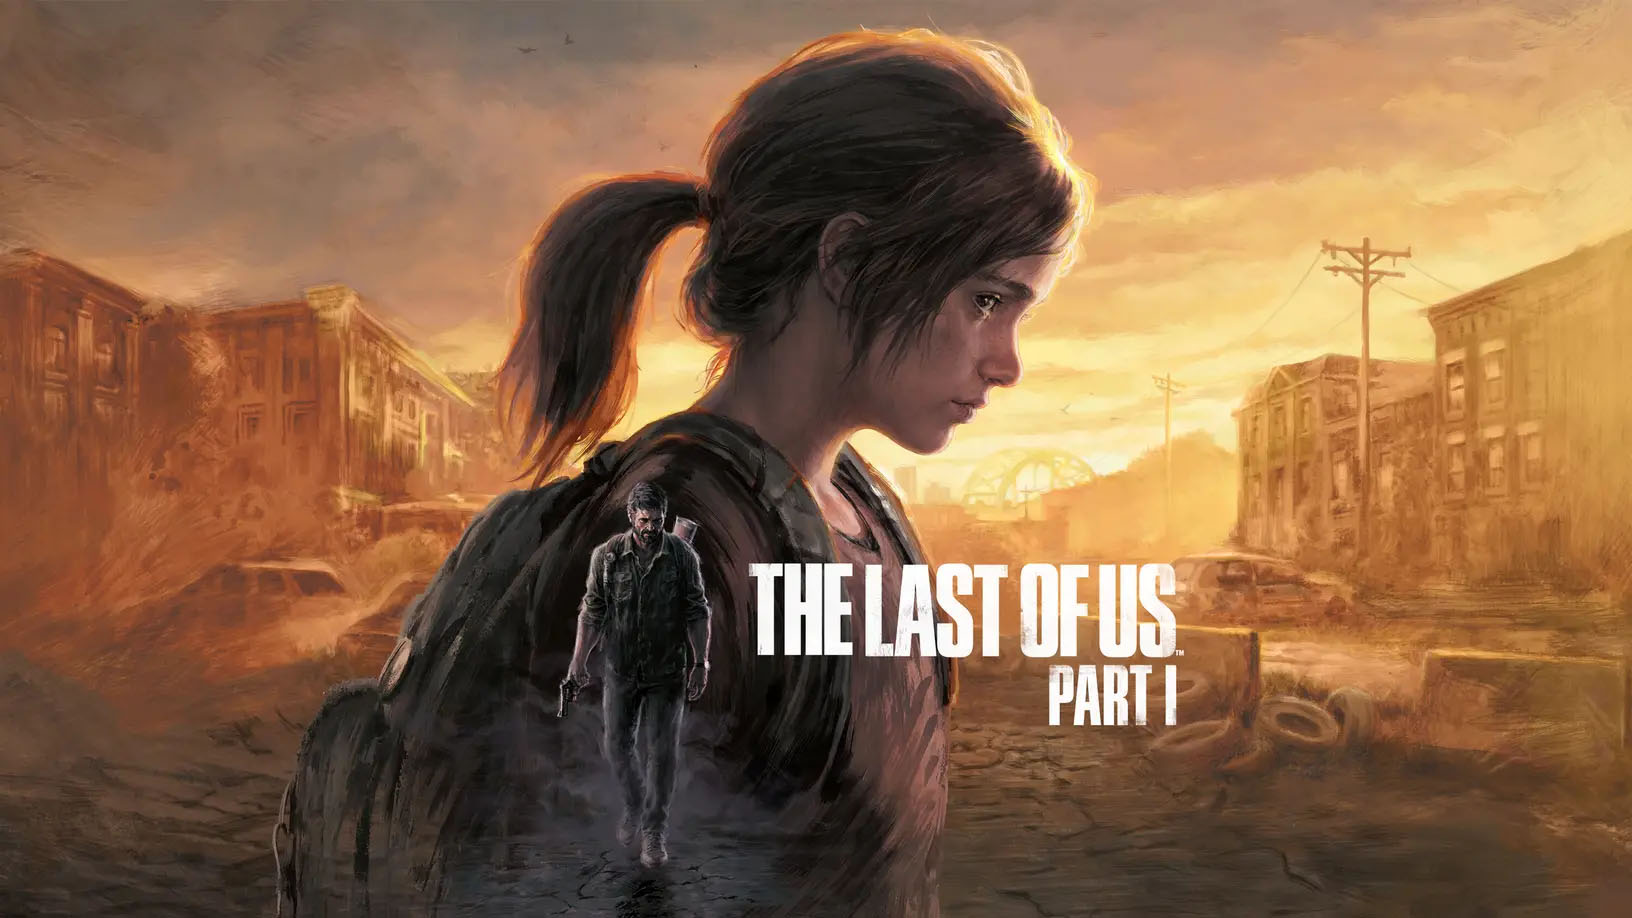 The Last of Us Part I remake announced for PC and PS5